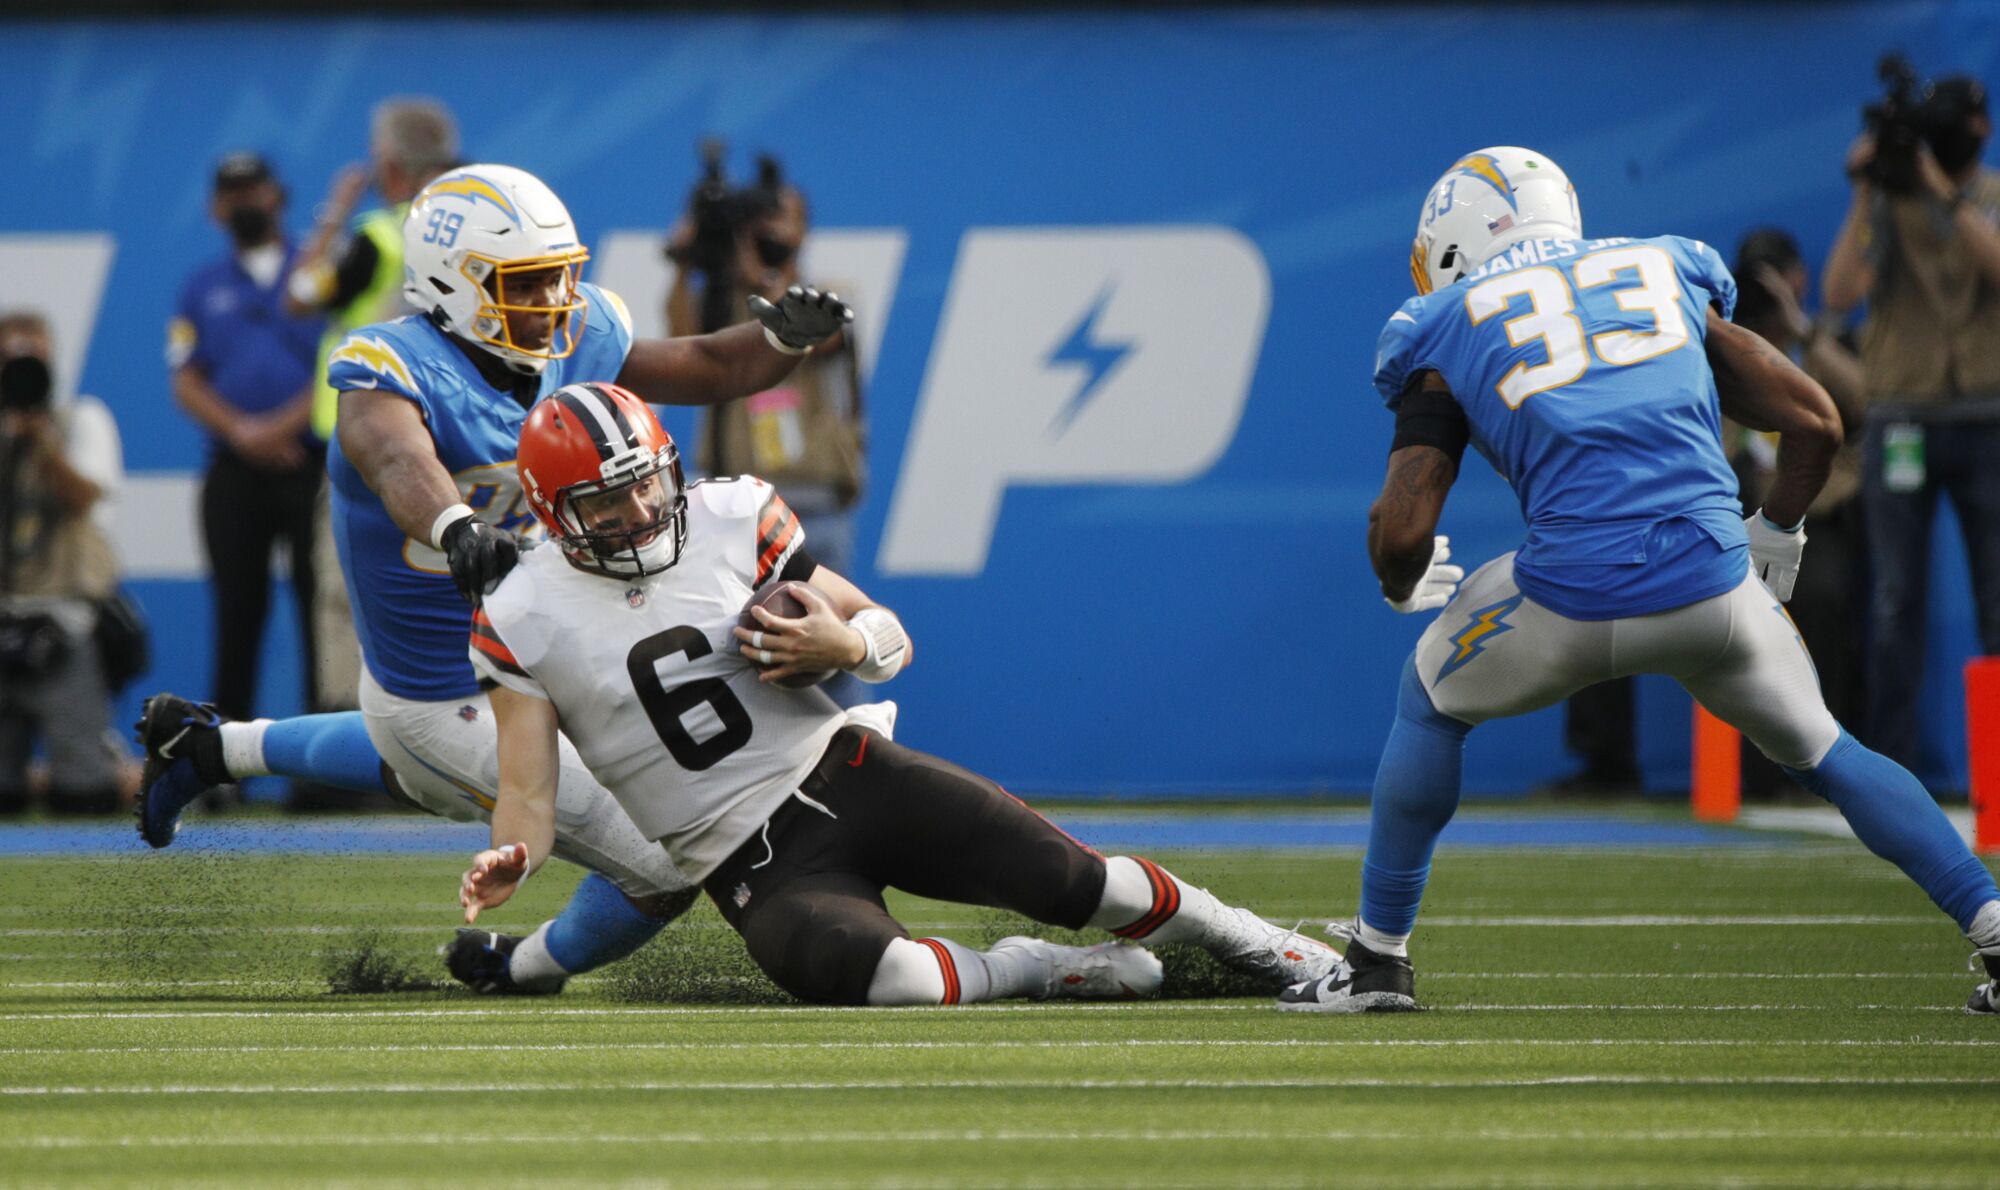 Cleveland Browns quarterback Baker Mayfield slides on the turf to avoid being tackled.